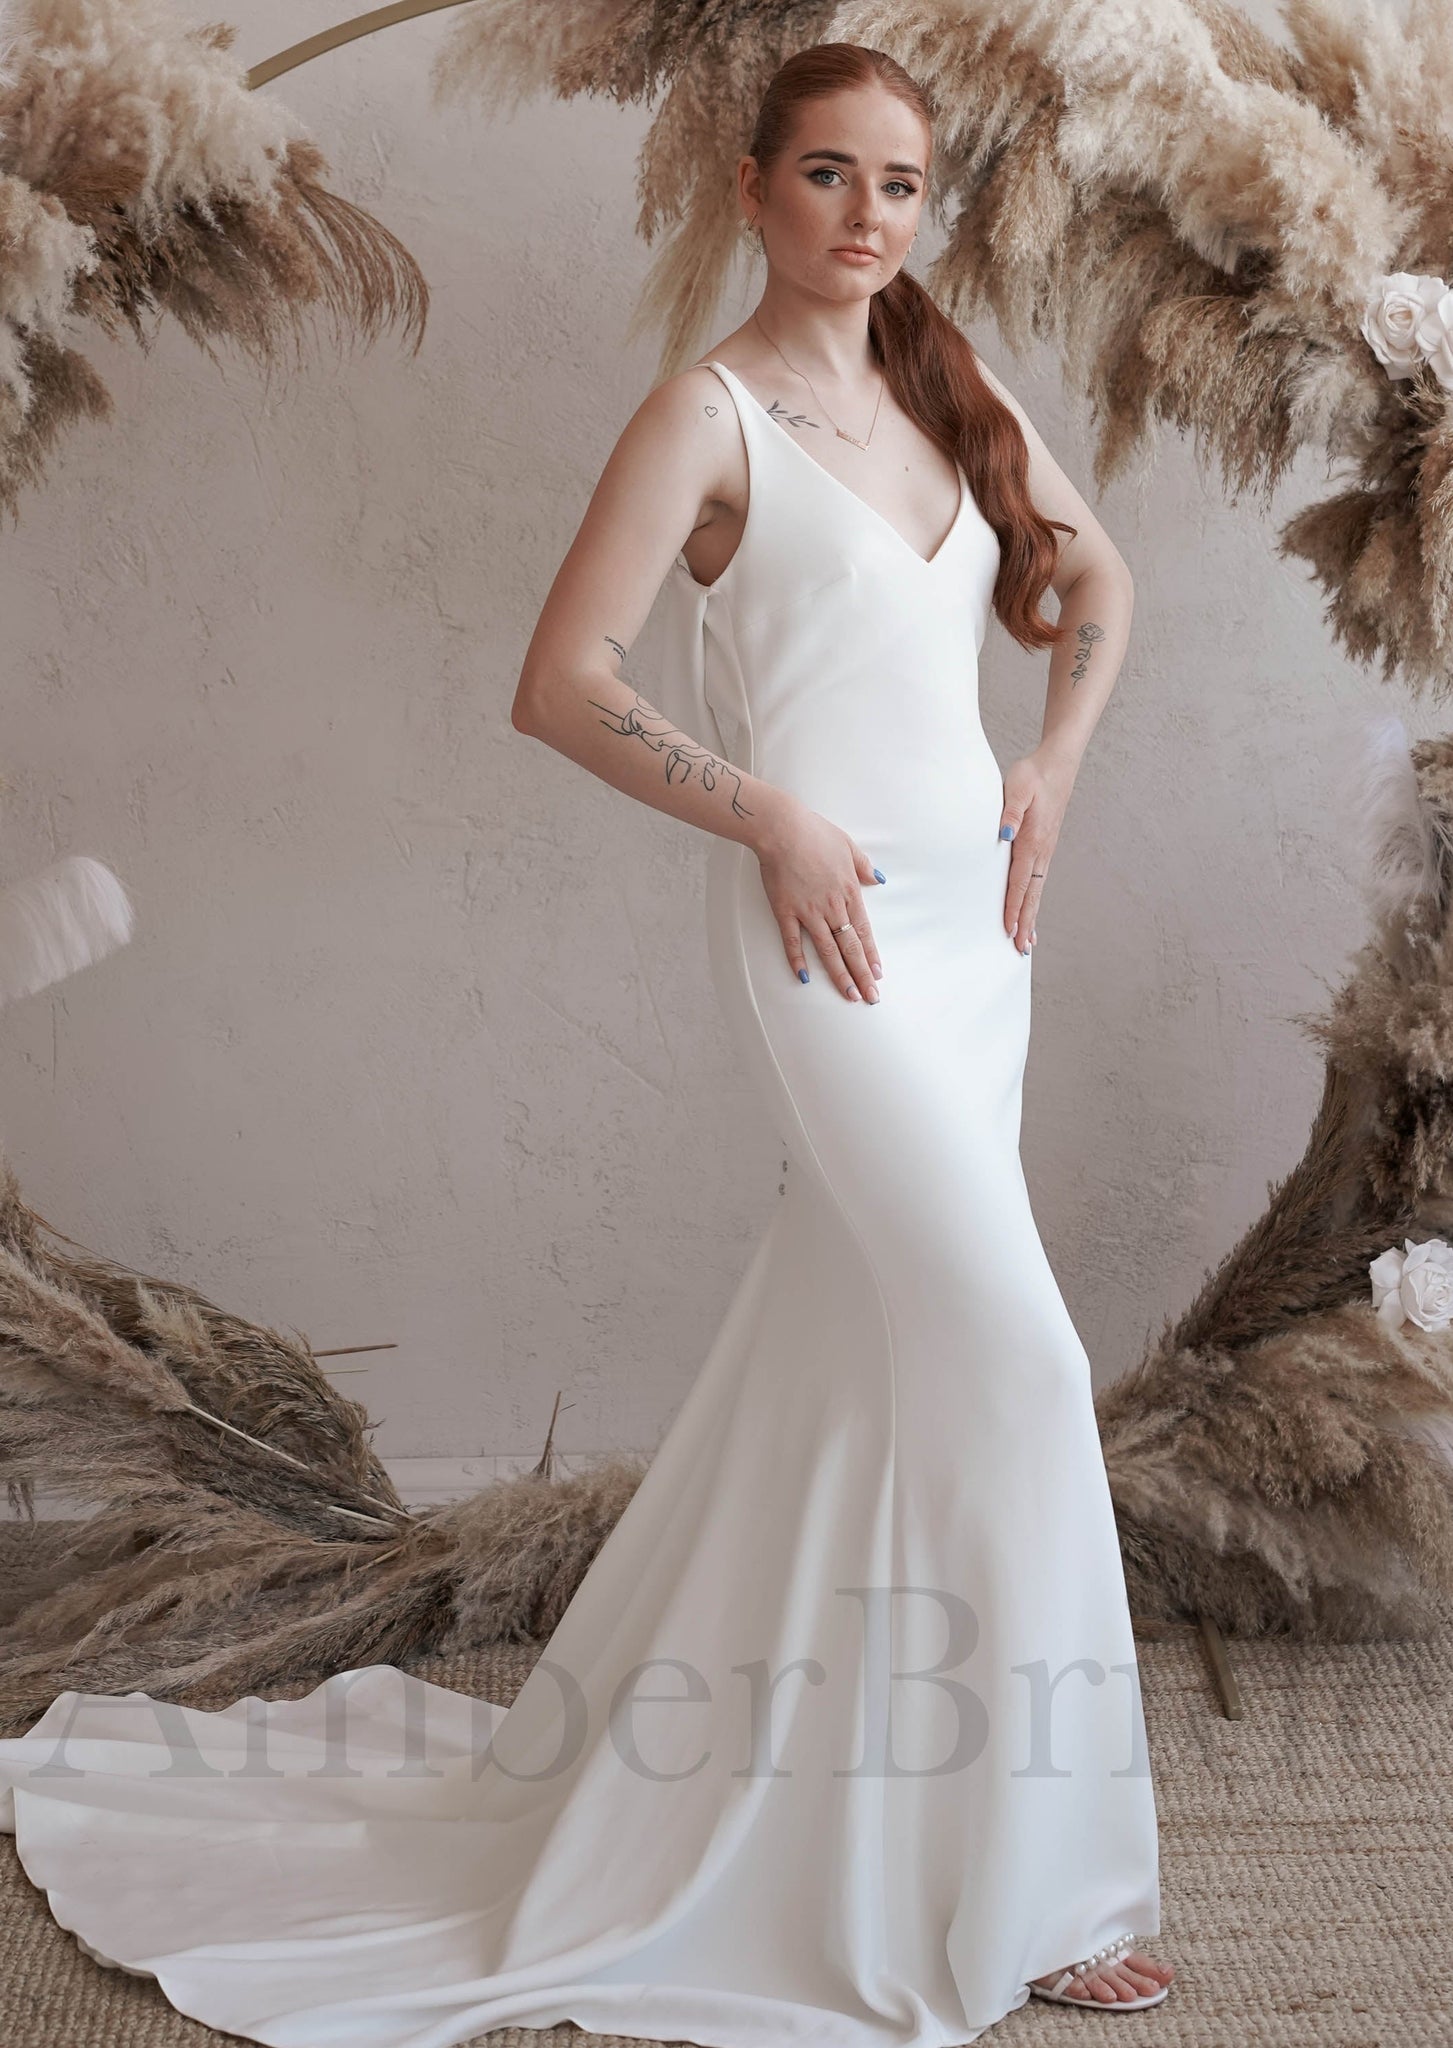 Simple Satin Mermaid Wedding Dress with V-Neck, Spaghetti Straps and Low Back